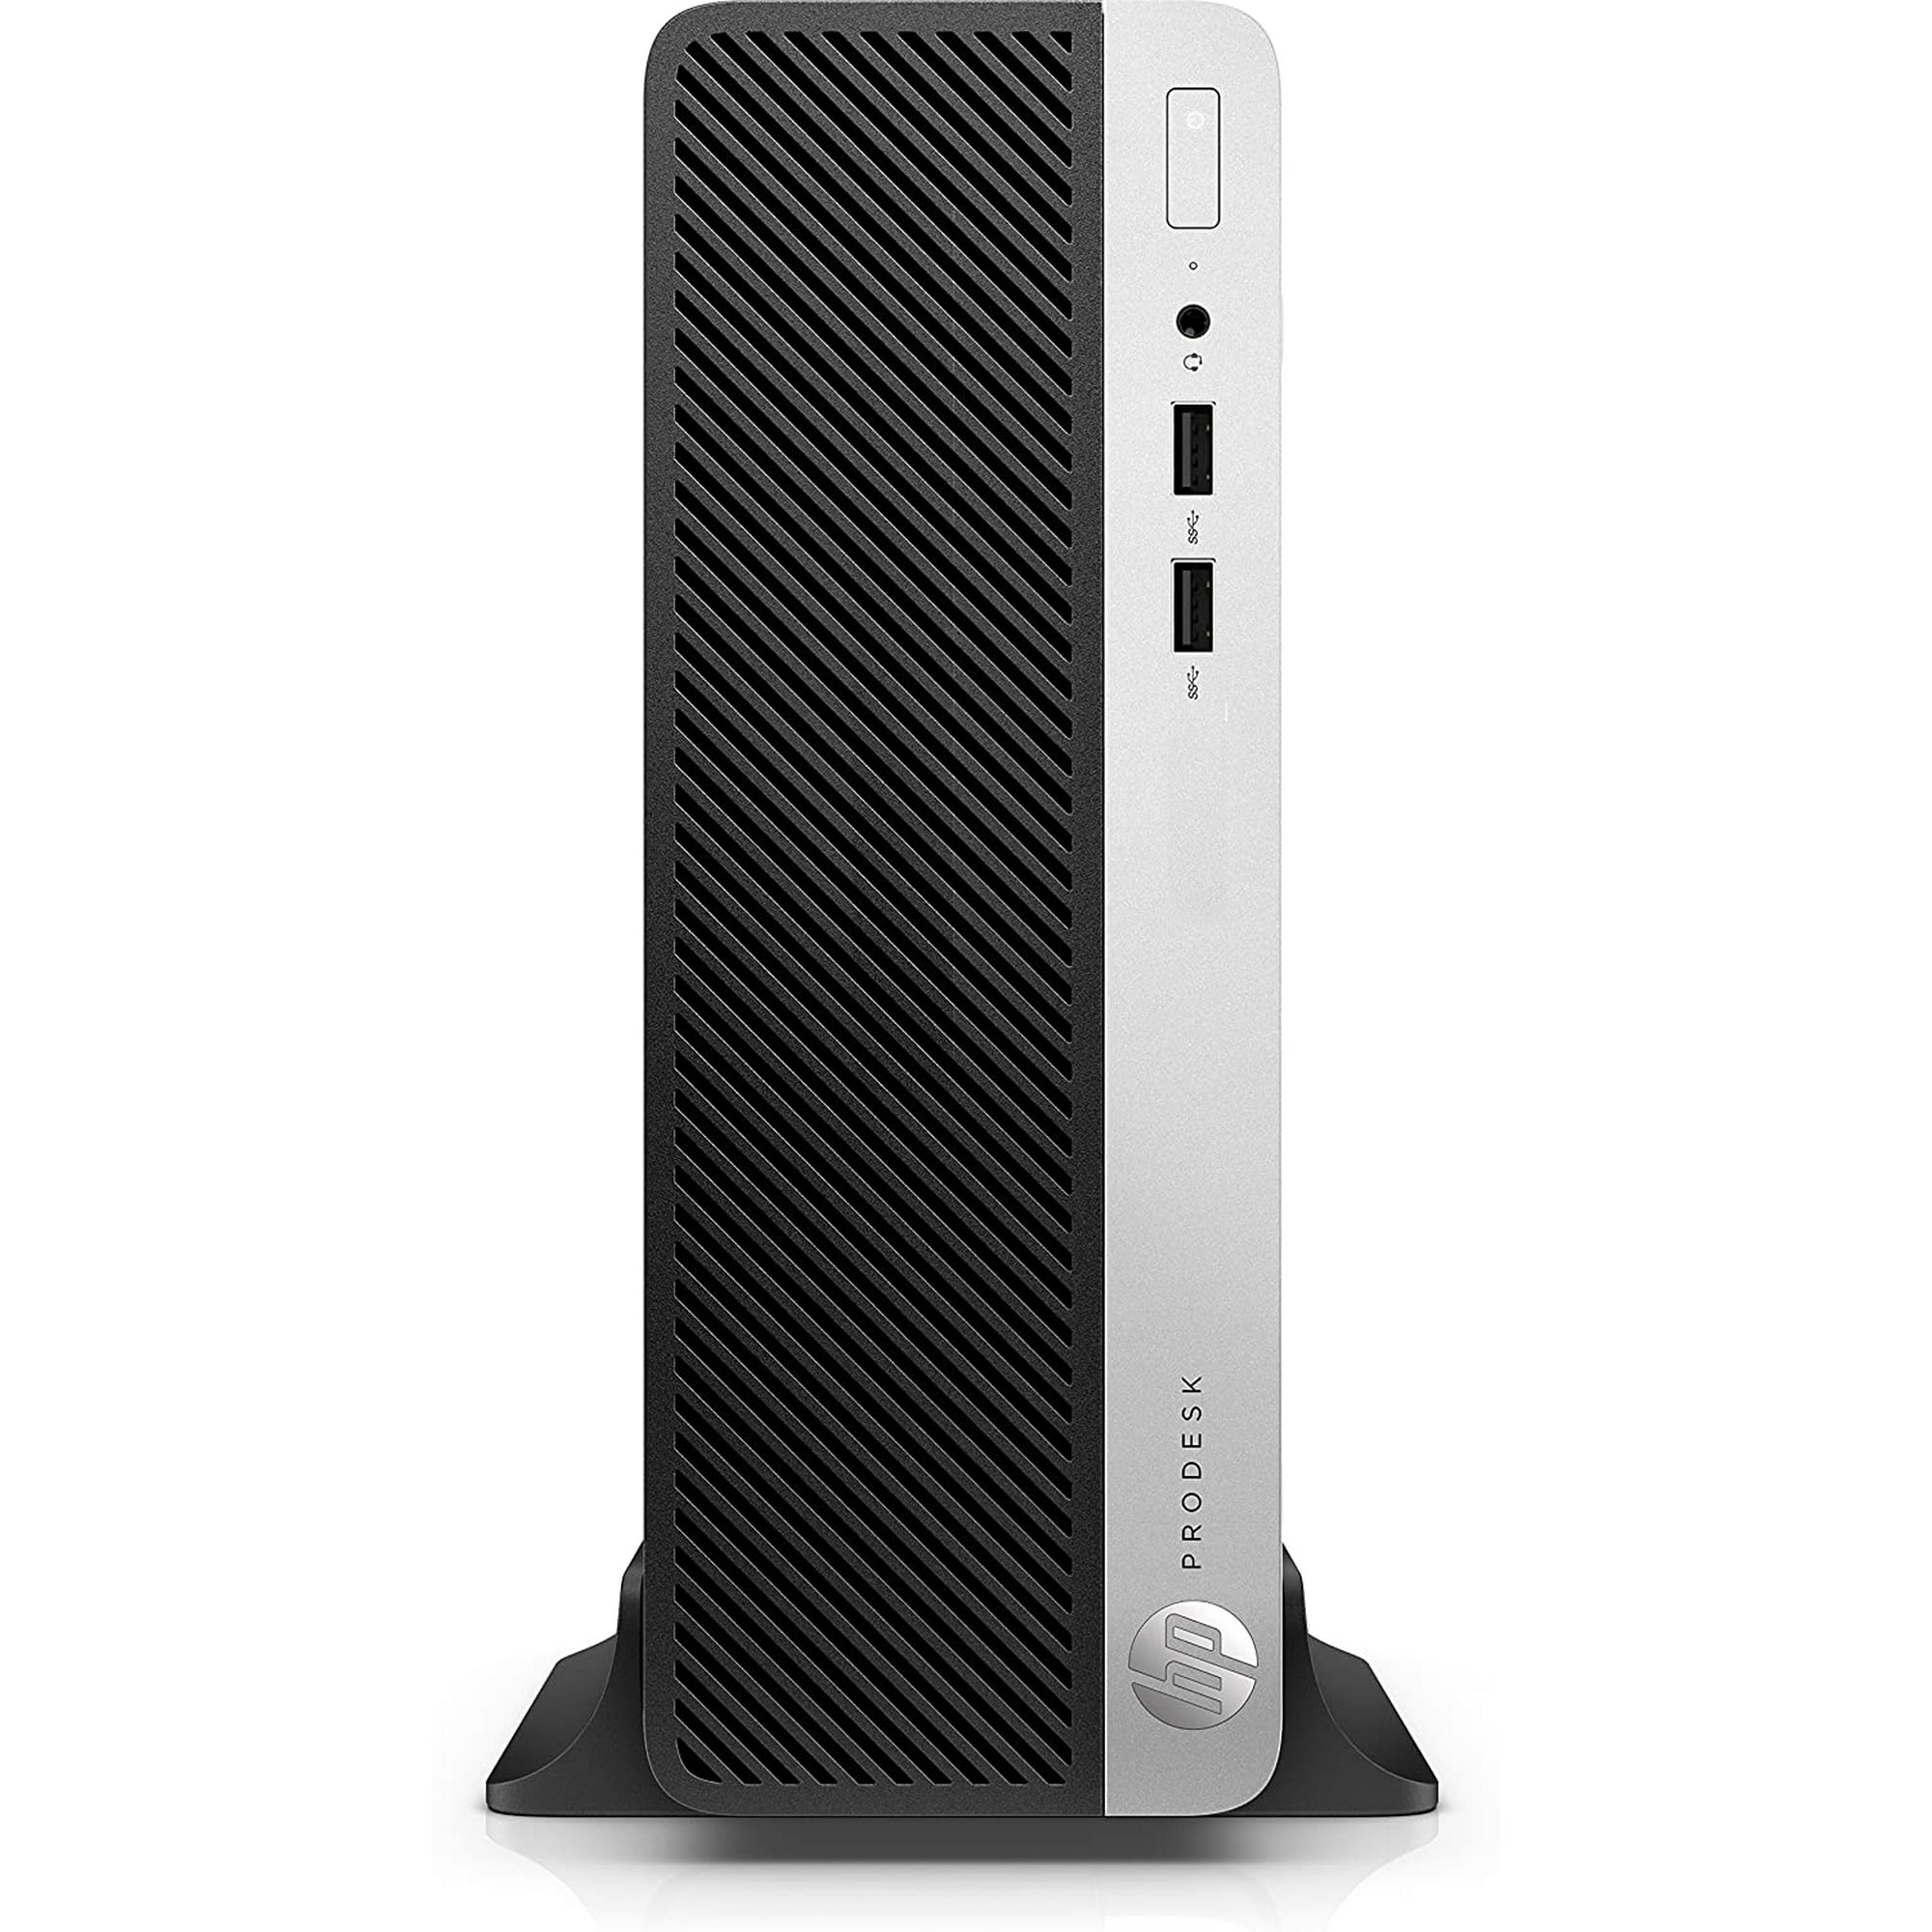 HP PRODESK 400 G5 SFF Home and Business Desktop (Intel i3-8100 4